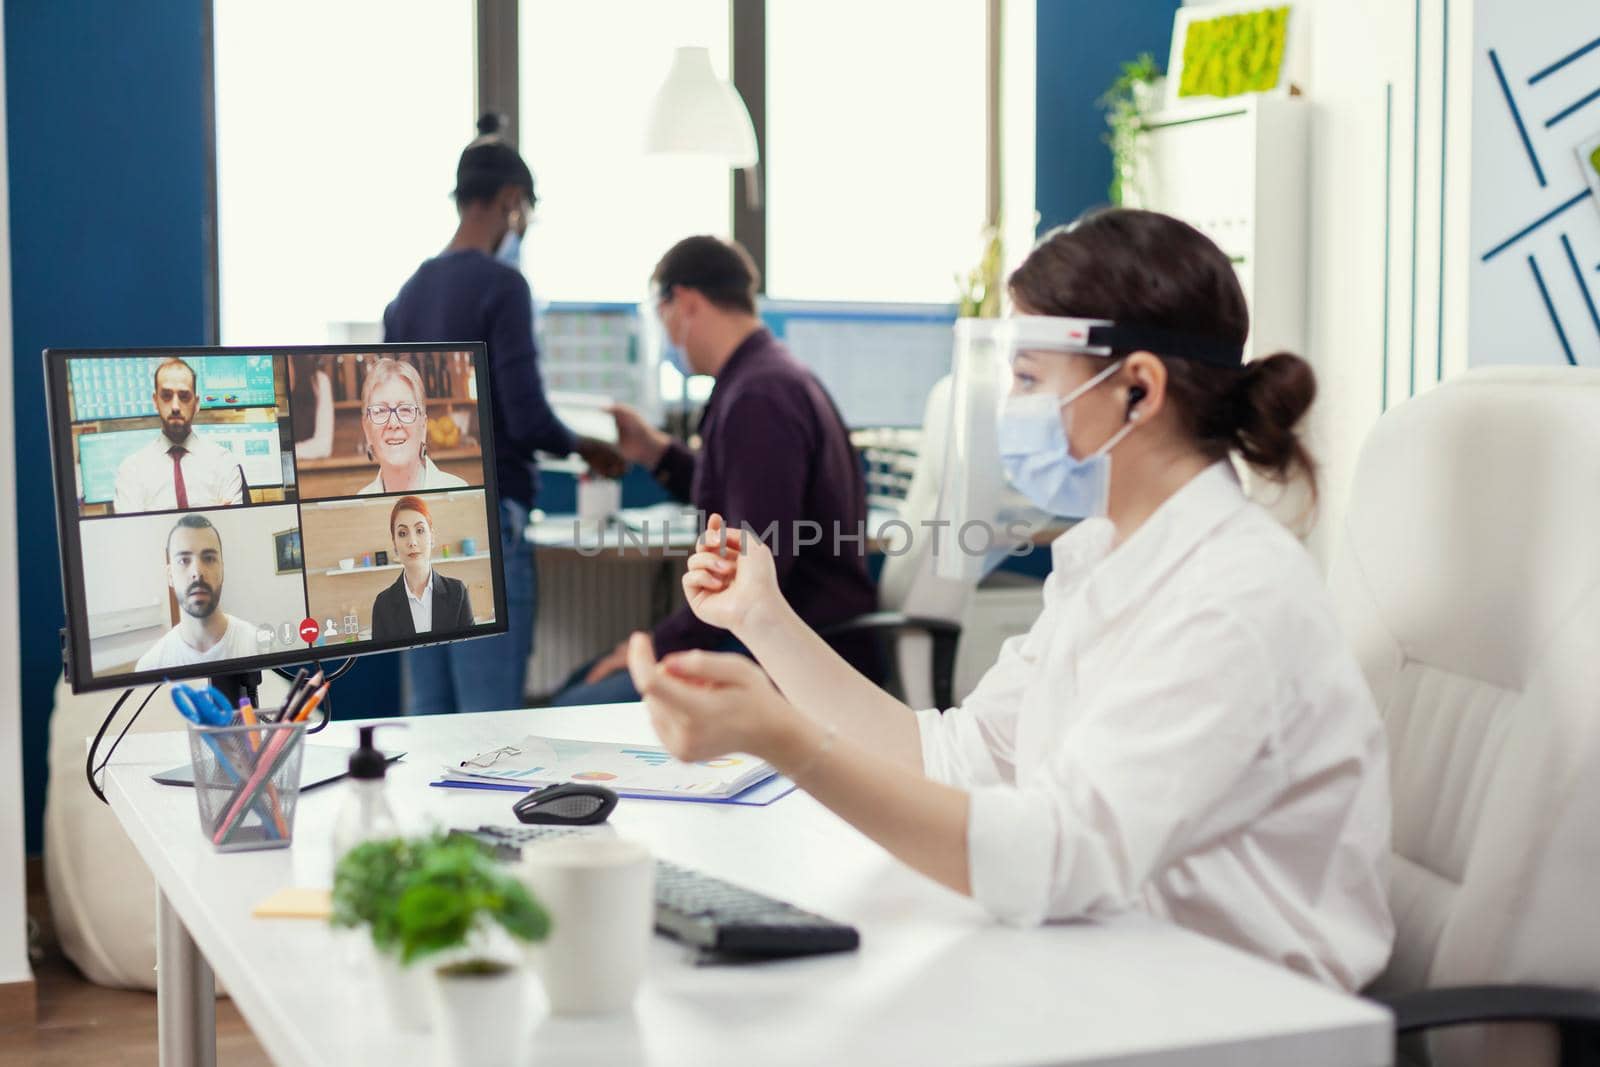 Businesswoman listening businesspeople during online conference by DCStudio